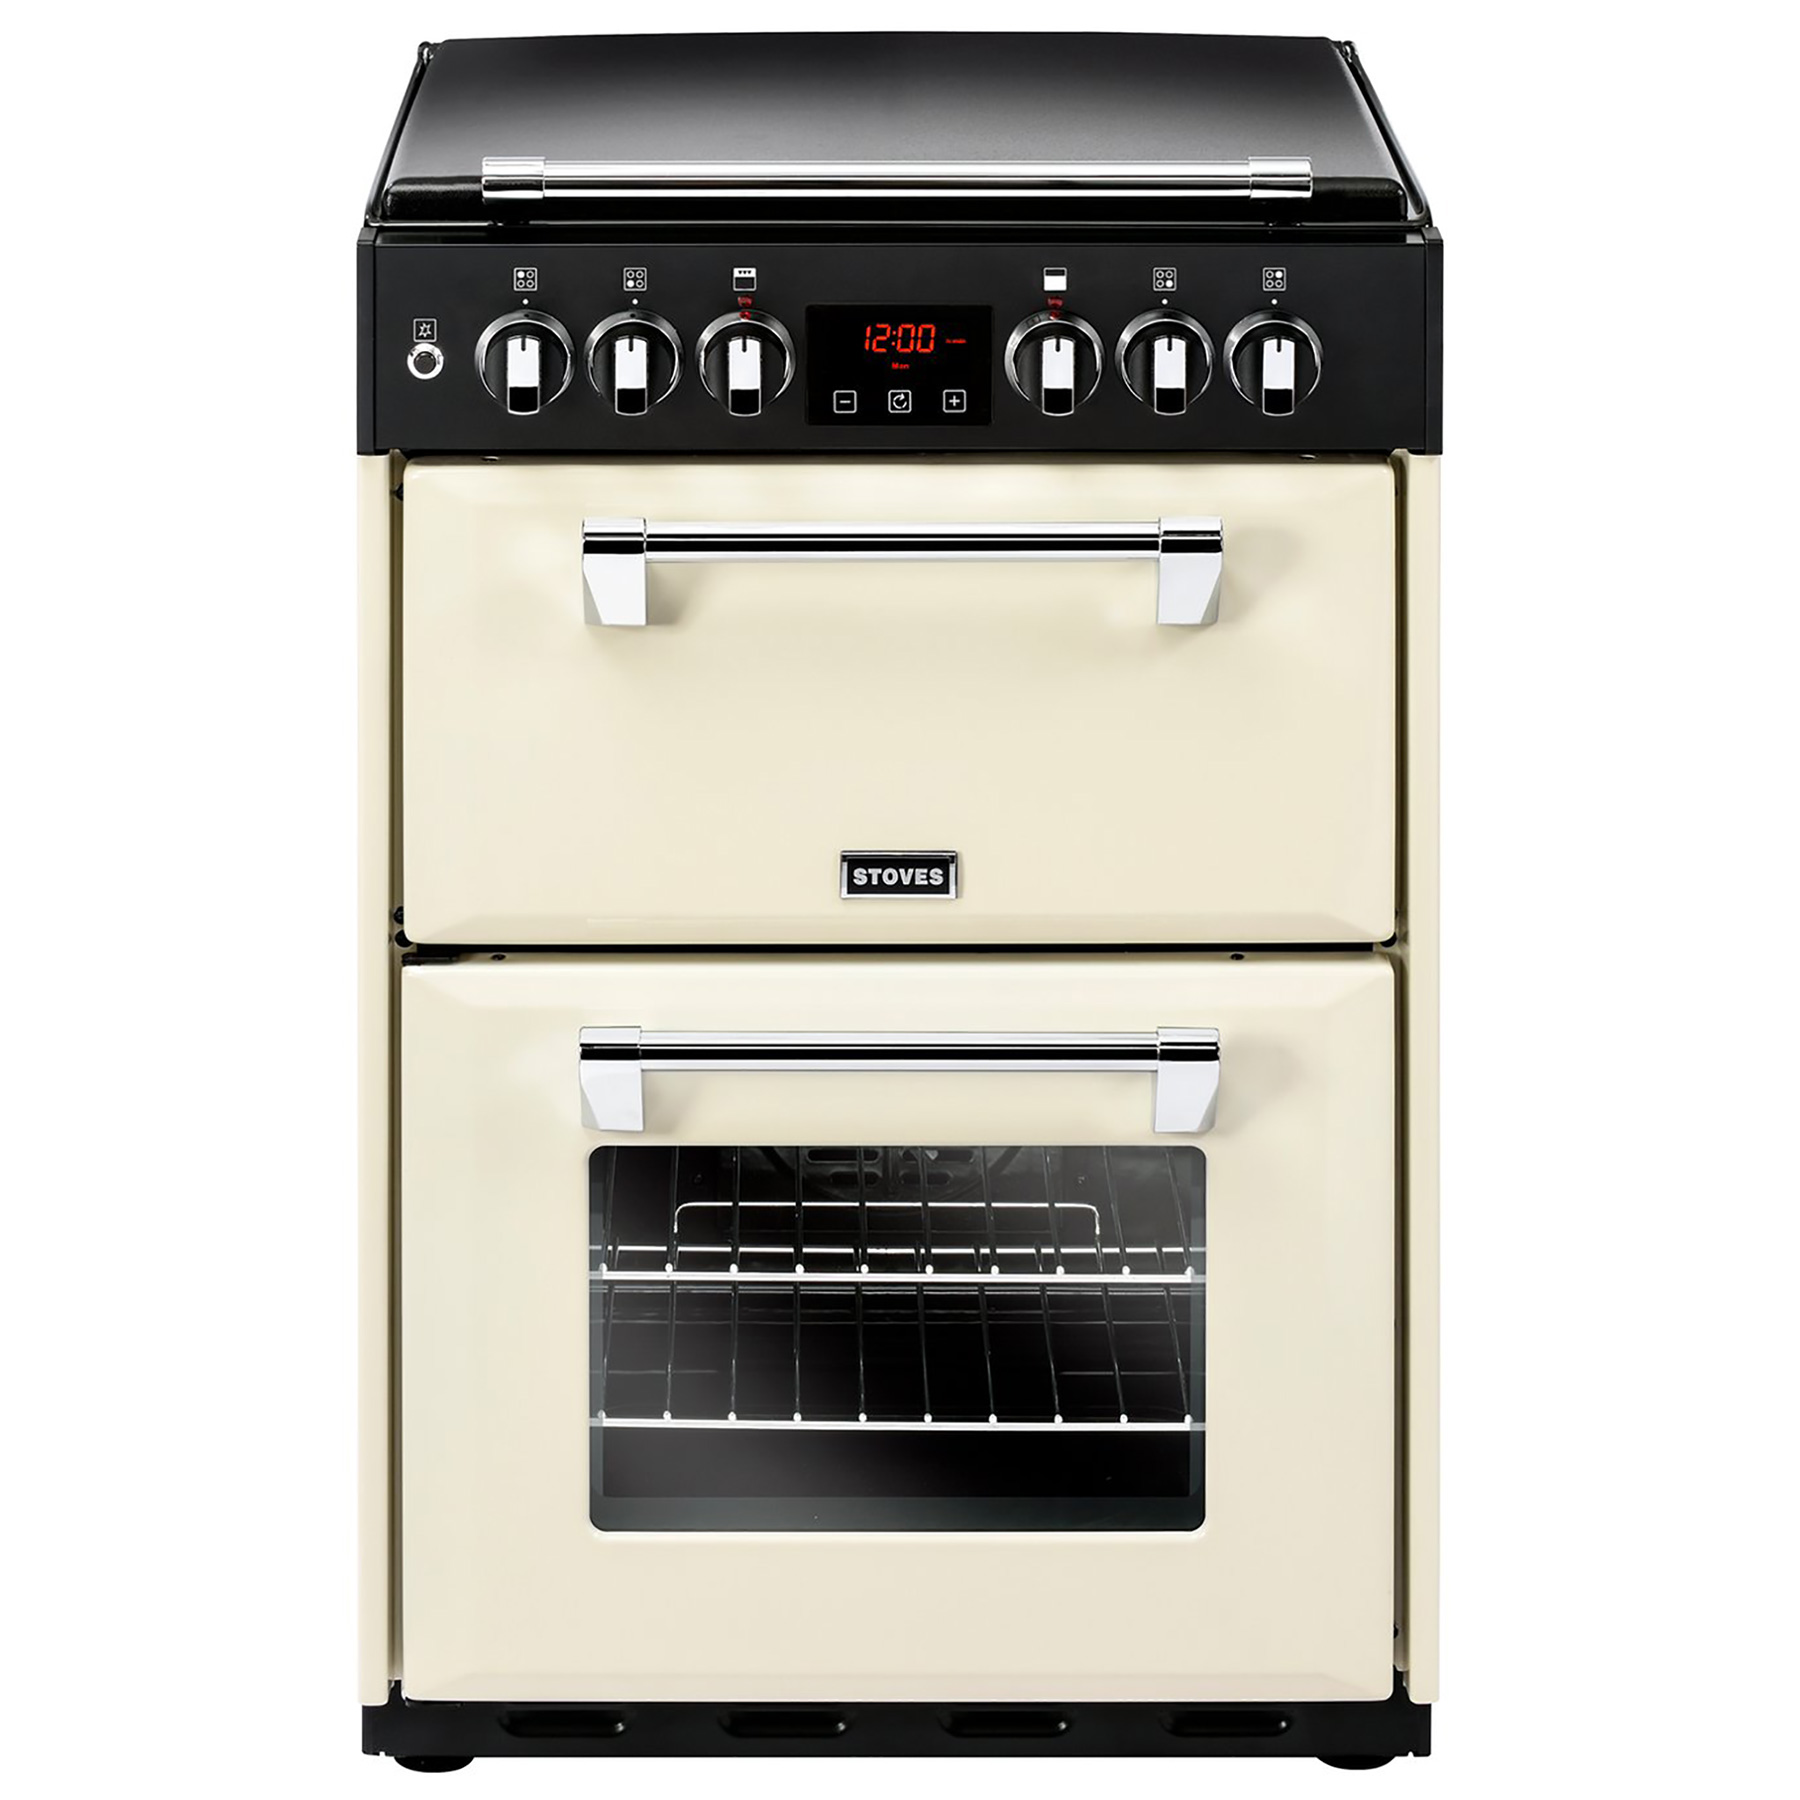 Stoves 444444722 60cm RICHMOND 600DF D Oven Dual Fuel Cooker in Cream